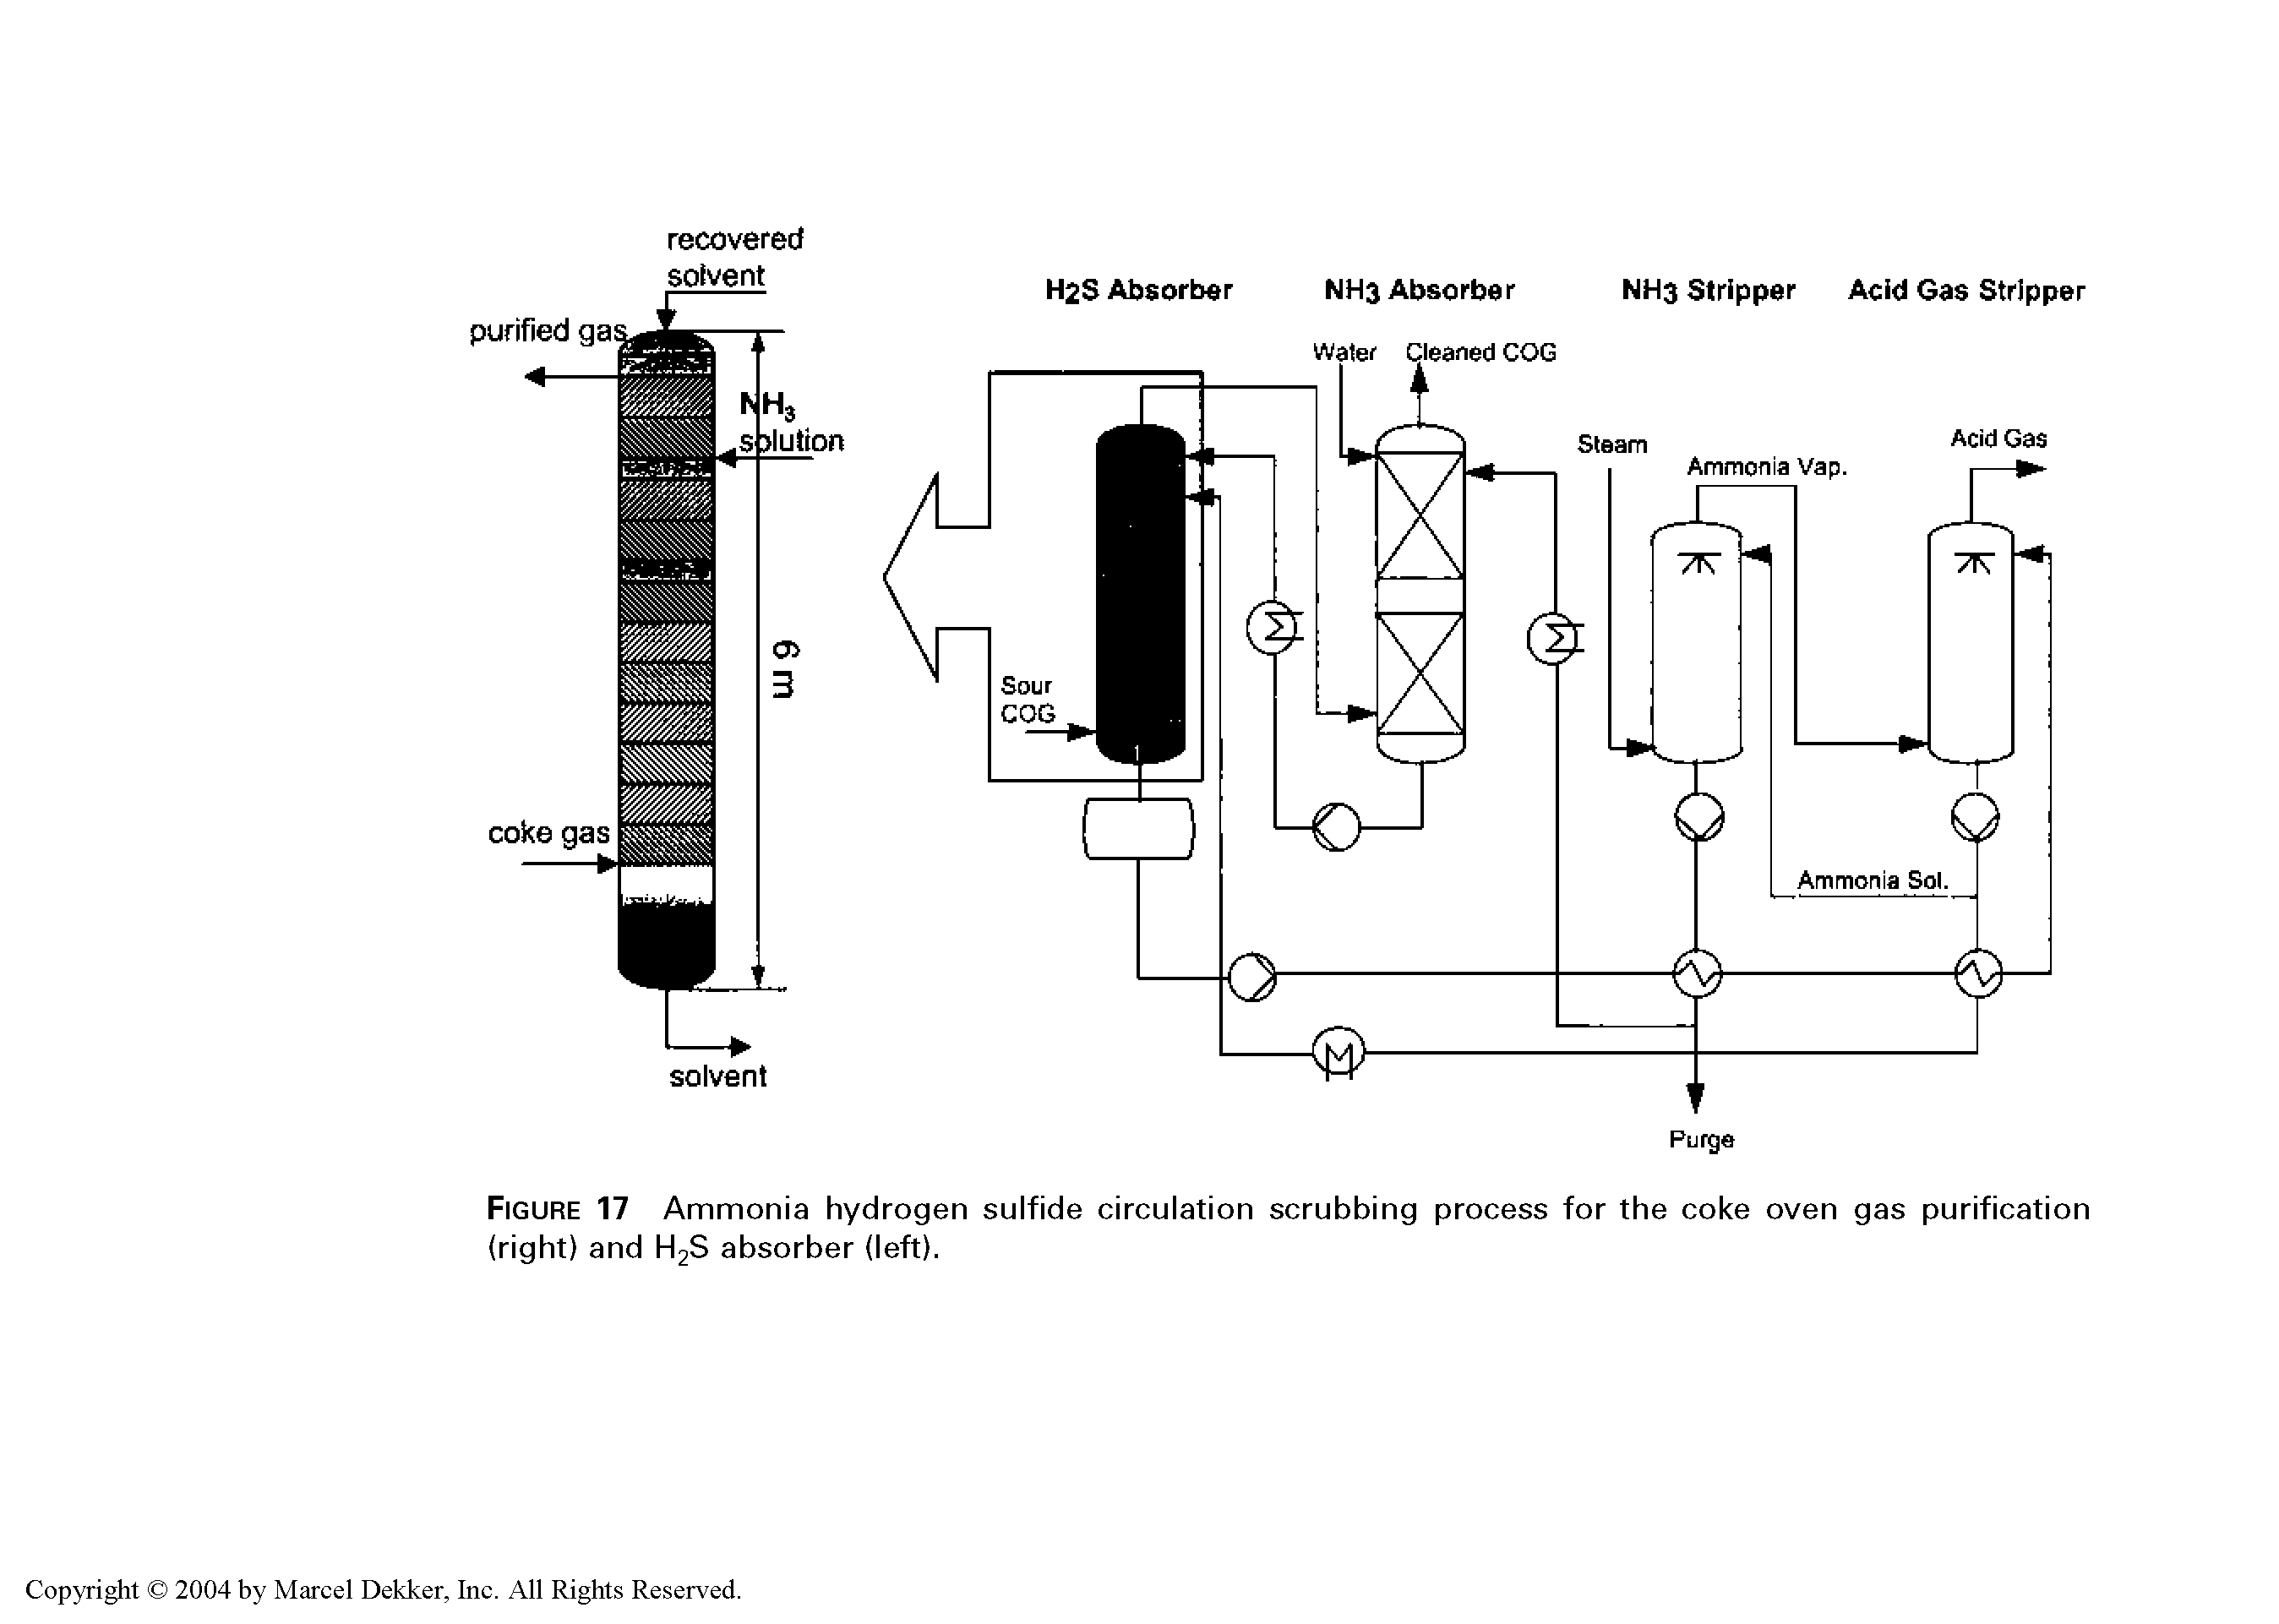 Figure 17 Ammonia hydrogen sulfide circulation scrubbing process for the coke oven gas purification (right) and H2S absorber (left).